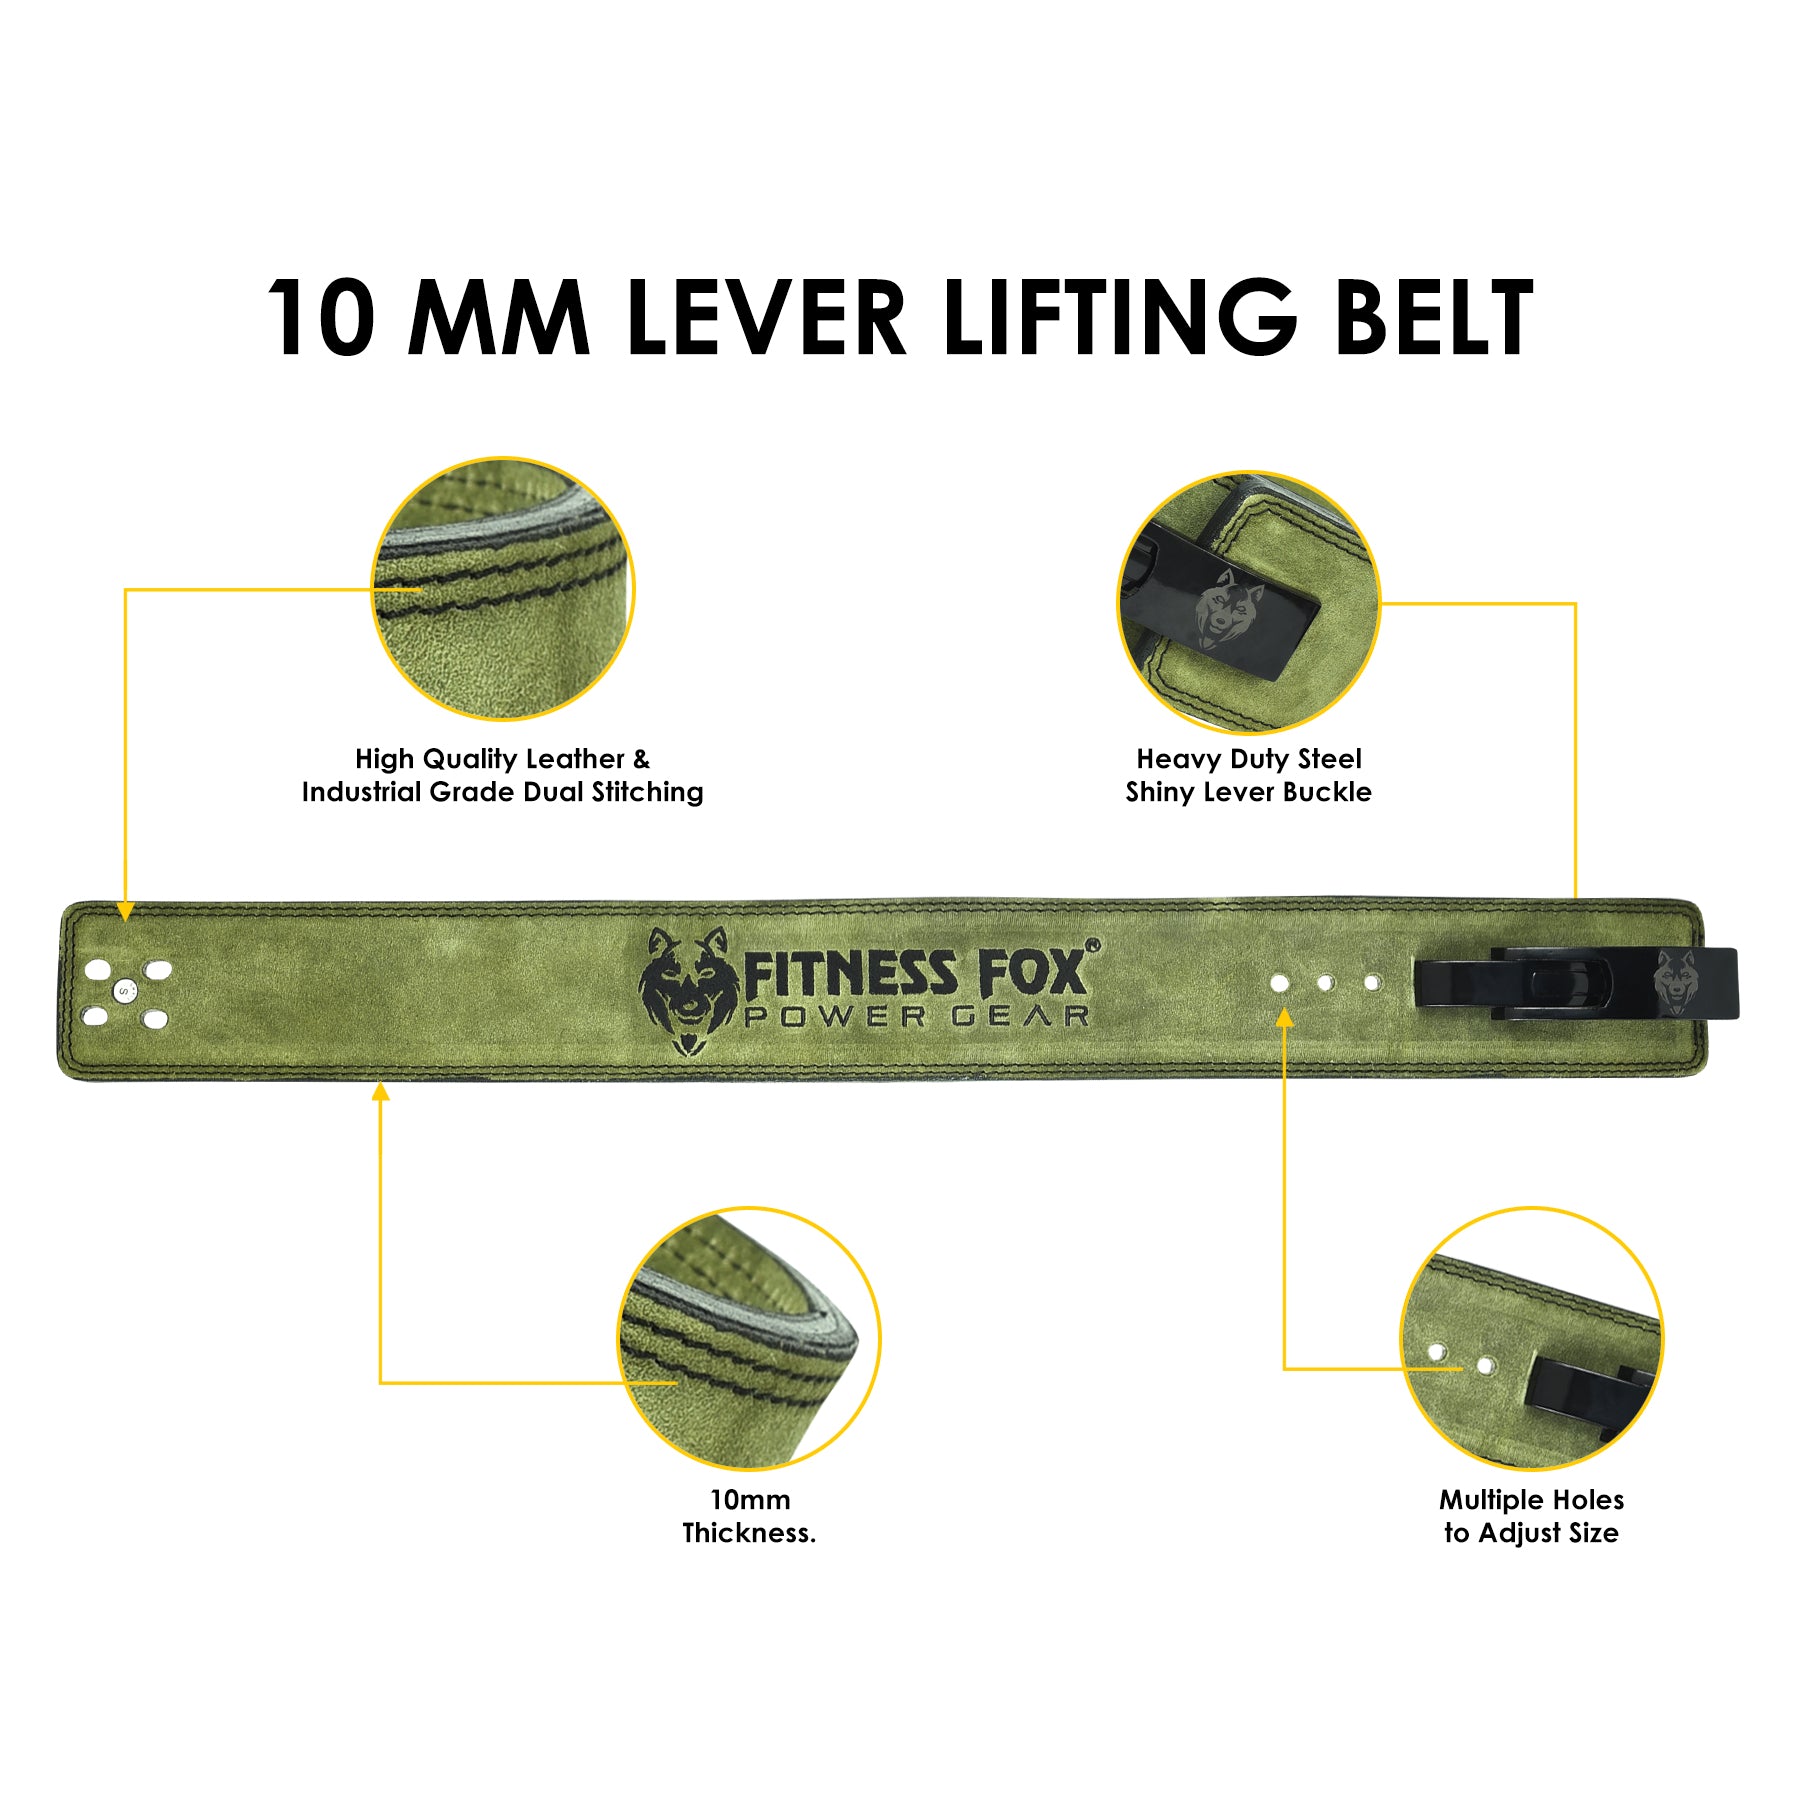 10 MM Suede Leather Powerlifting Lever Belt for Strength Training